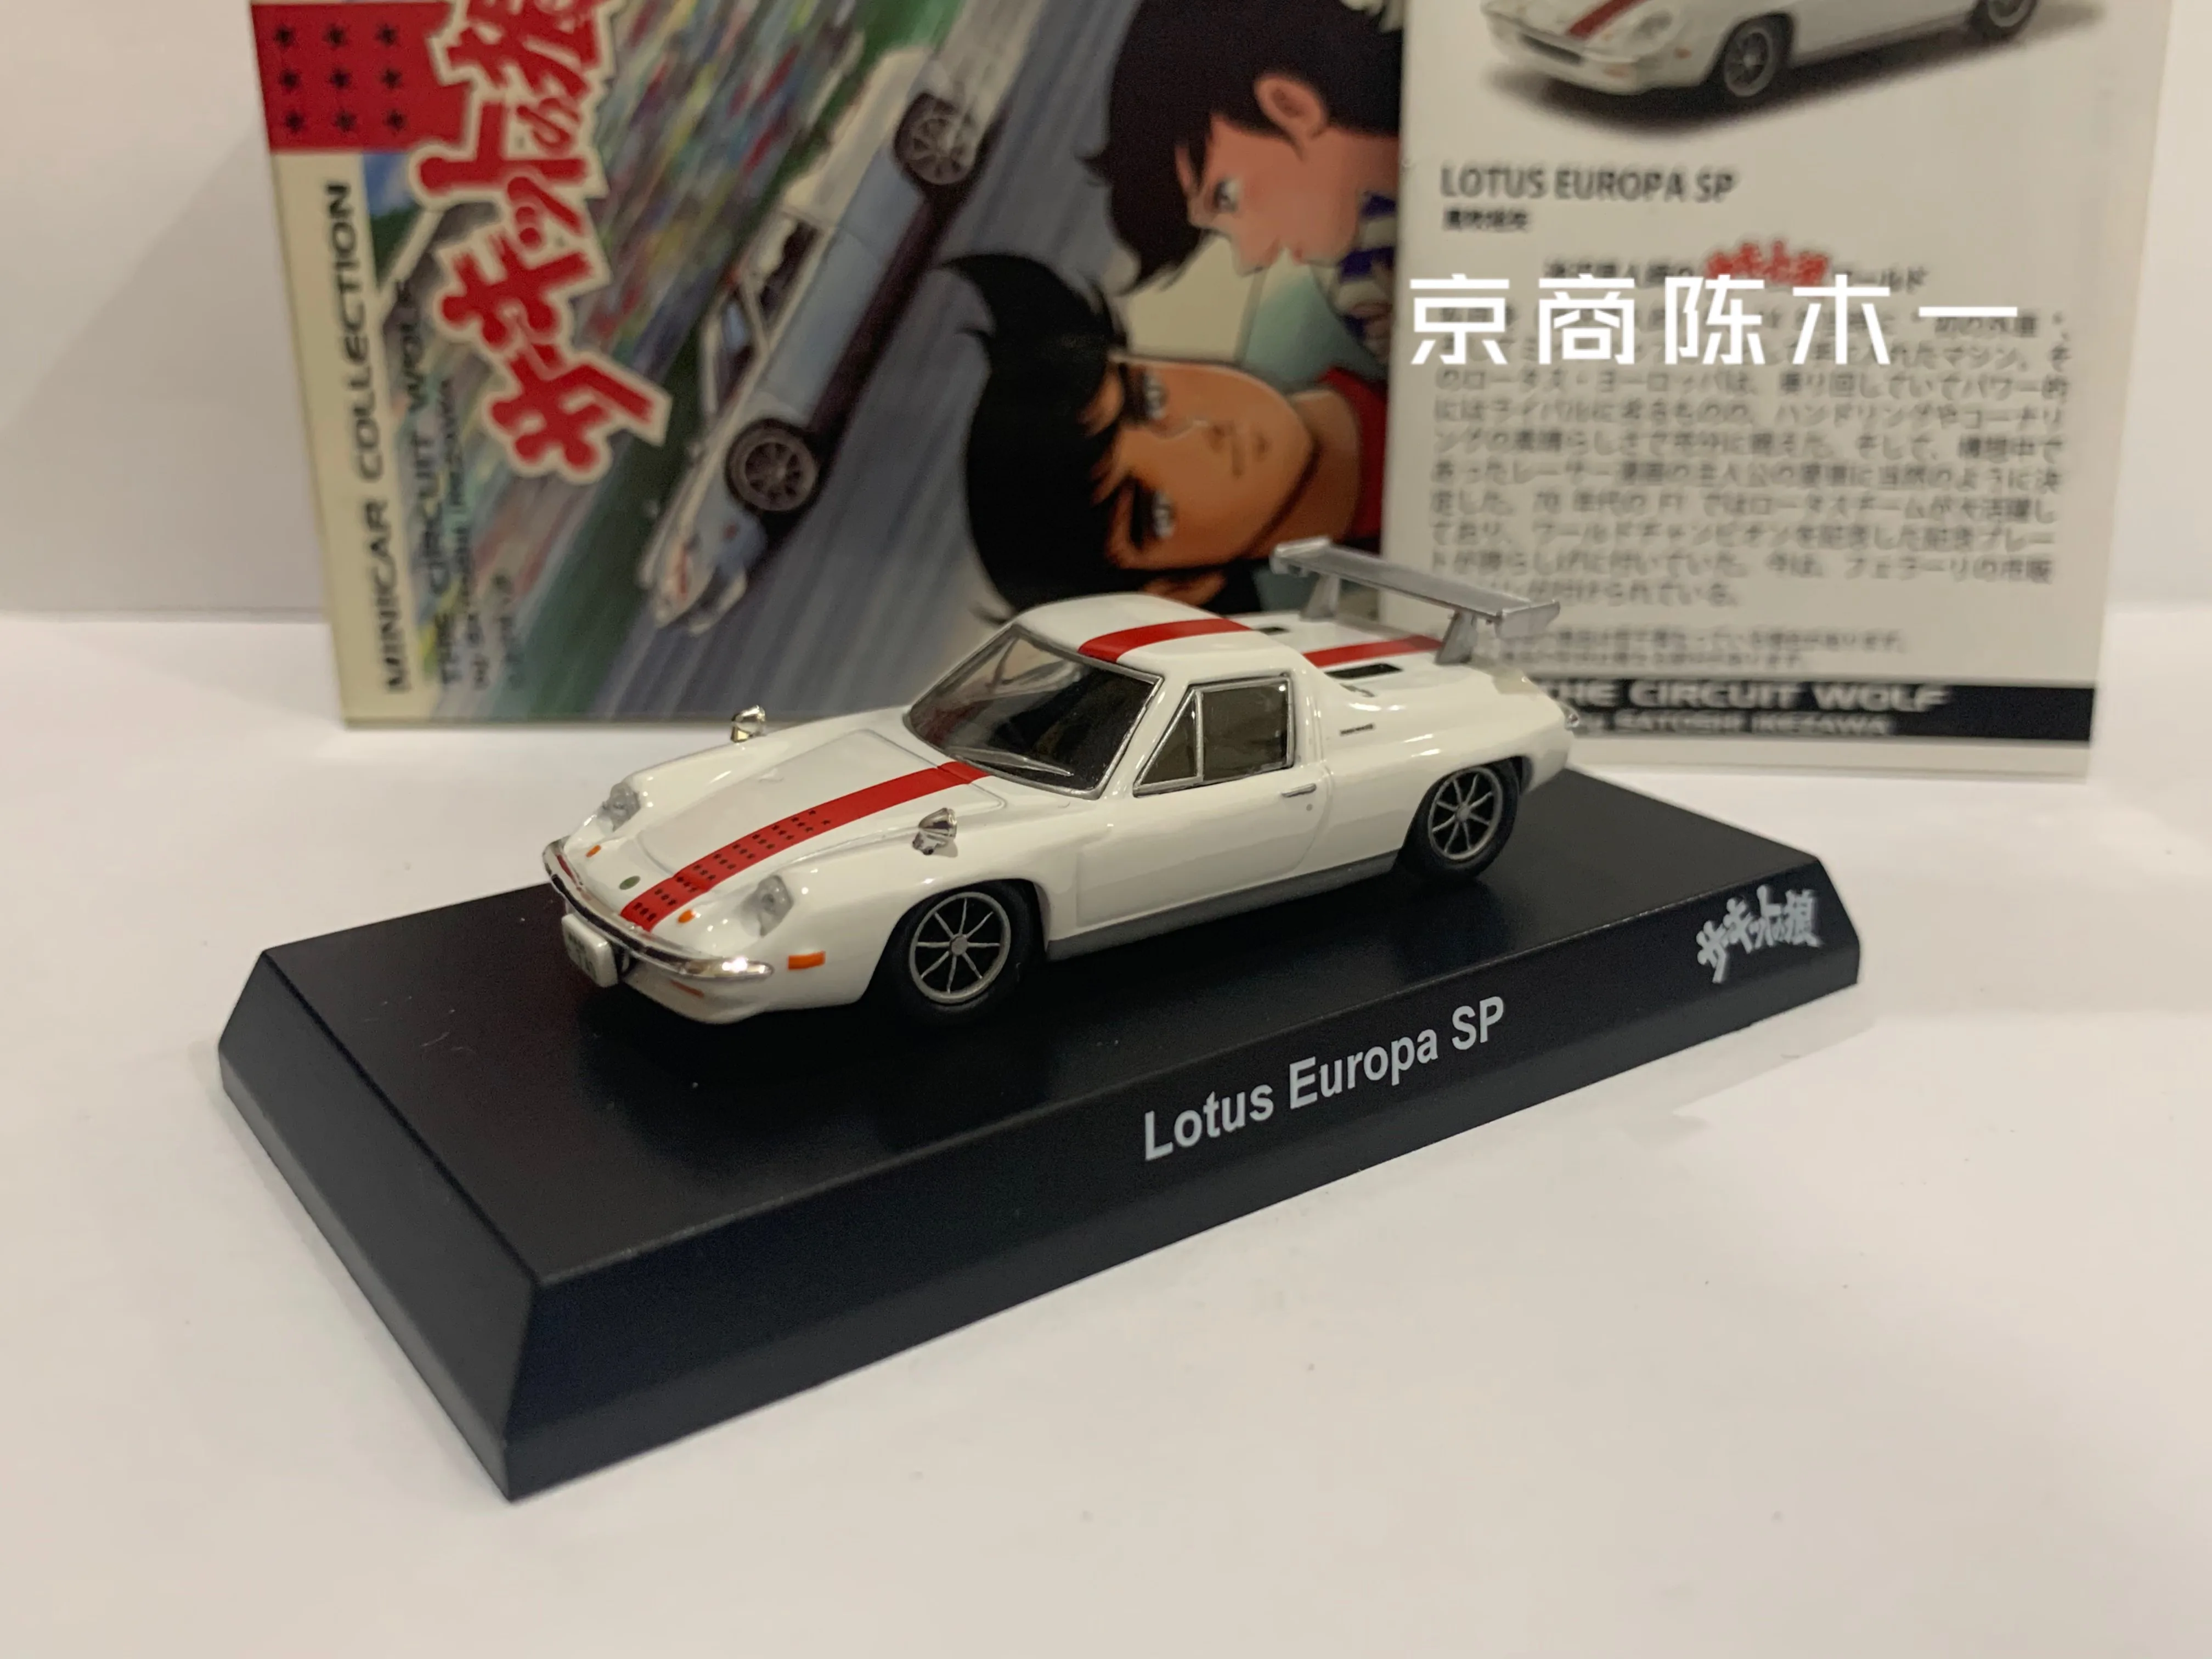 

1/64 KYOSHO Lotus Europa SP Collection die-cast alloy car decoration model toys